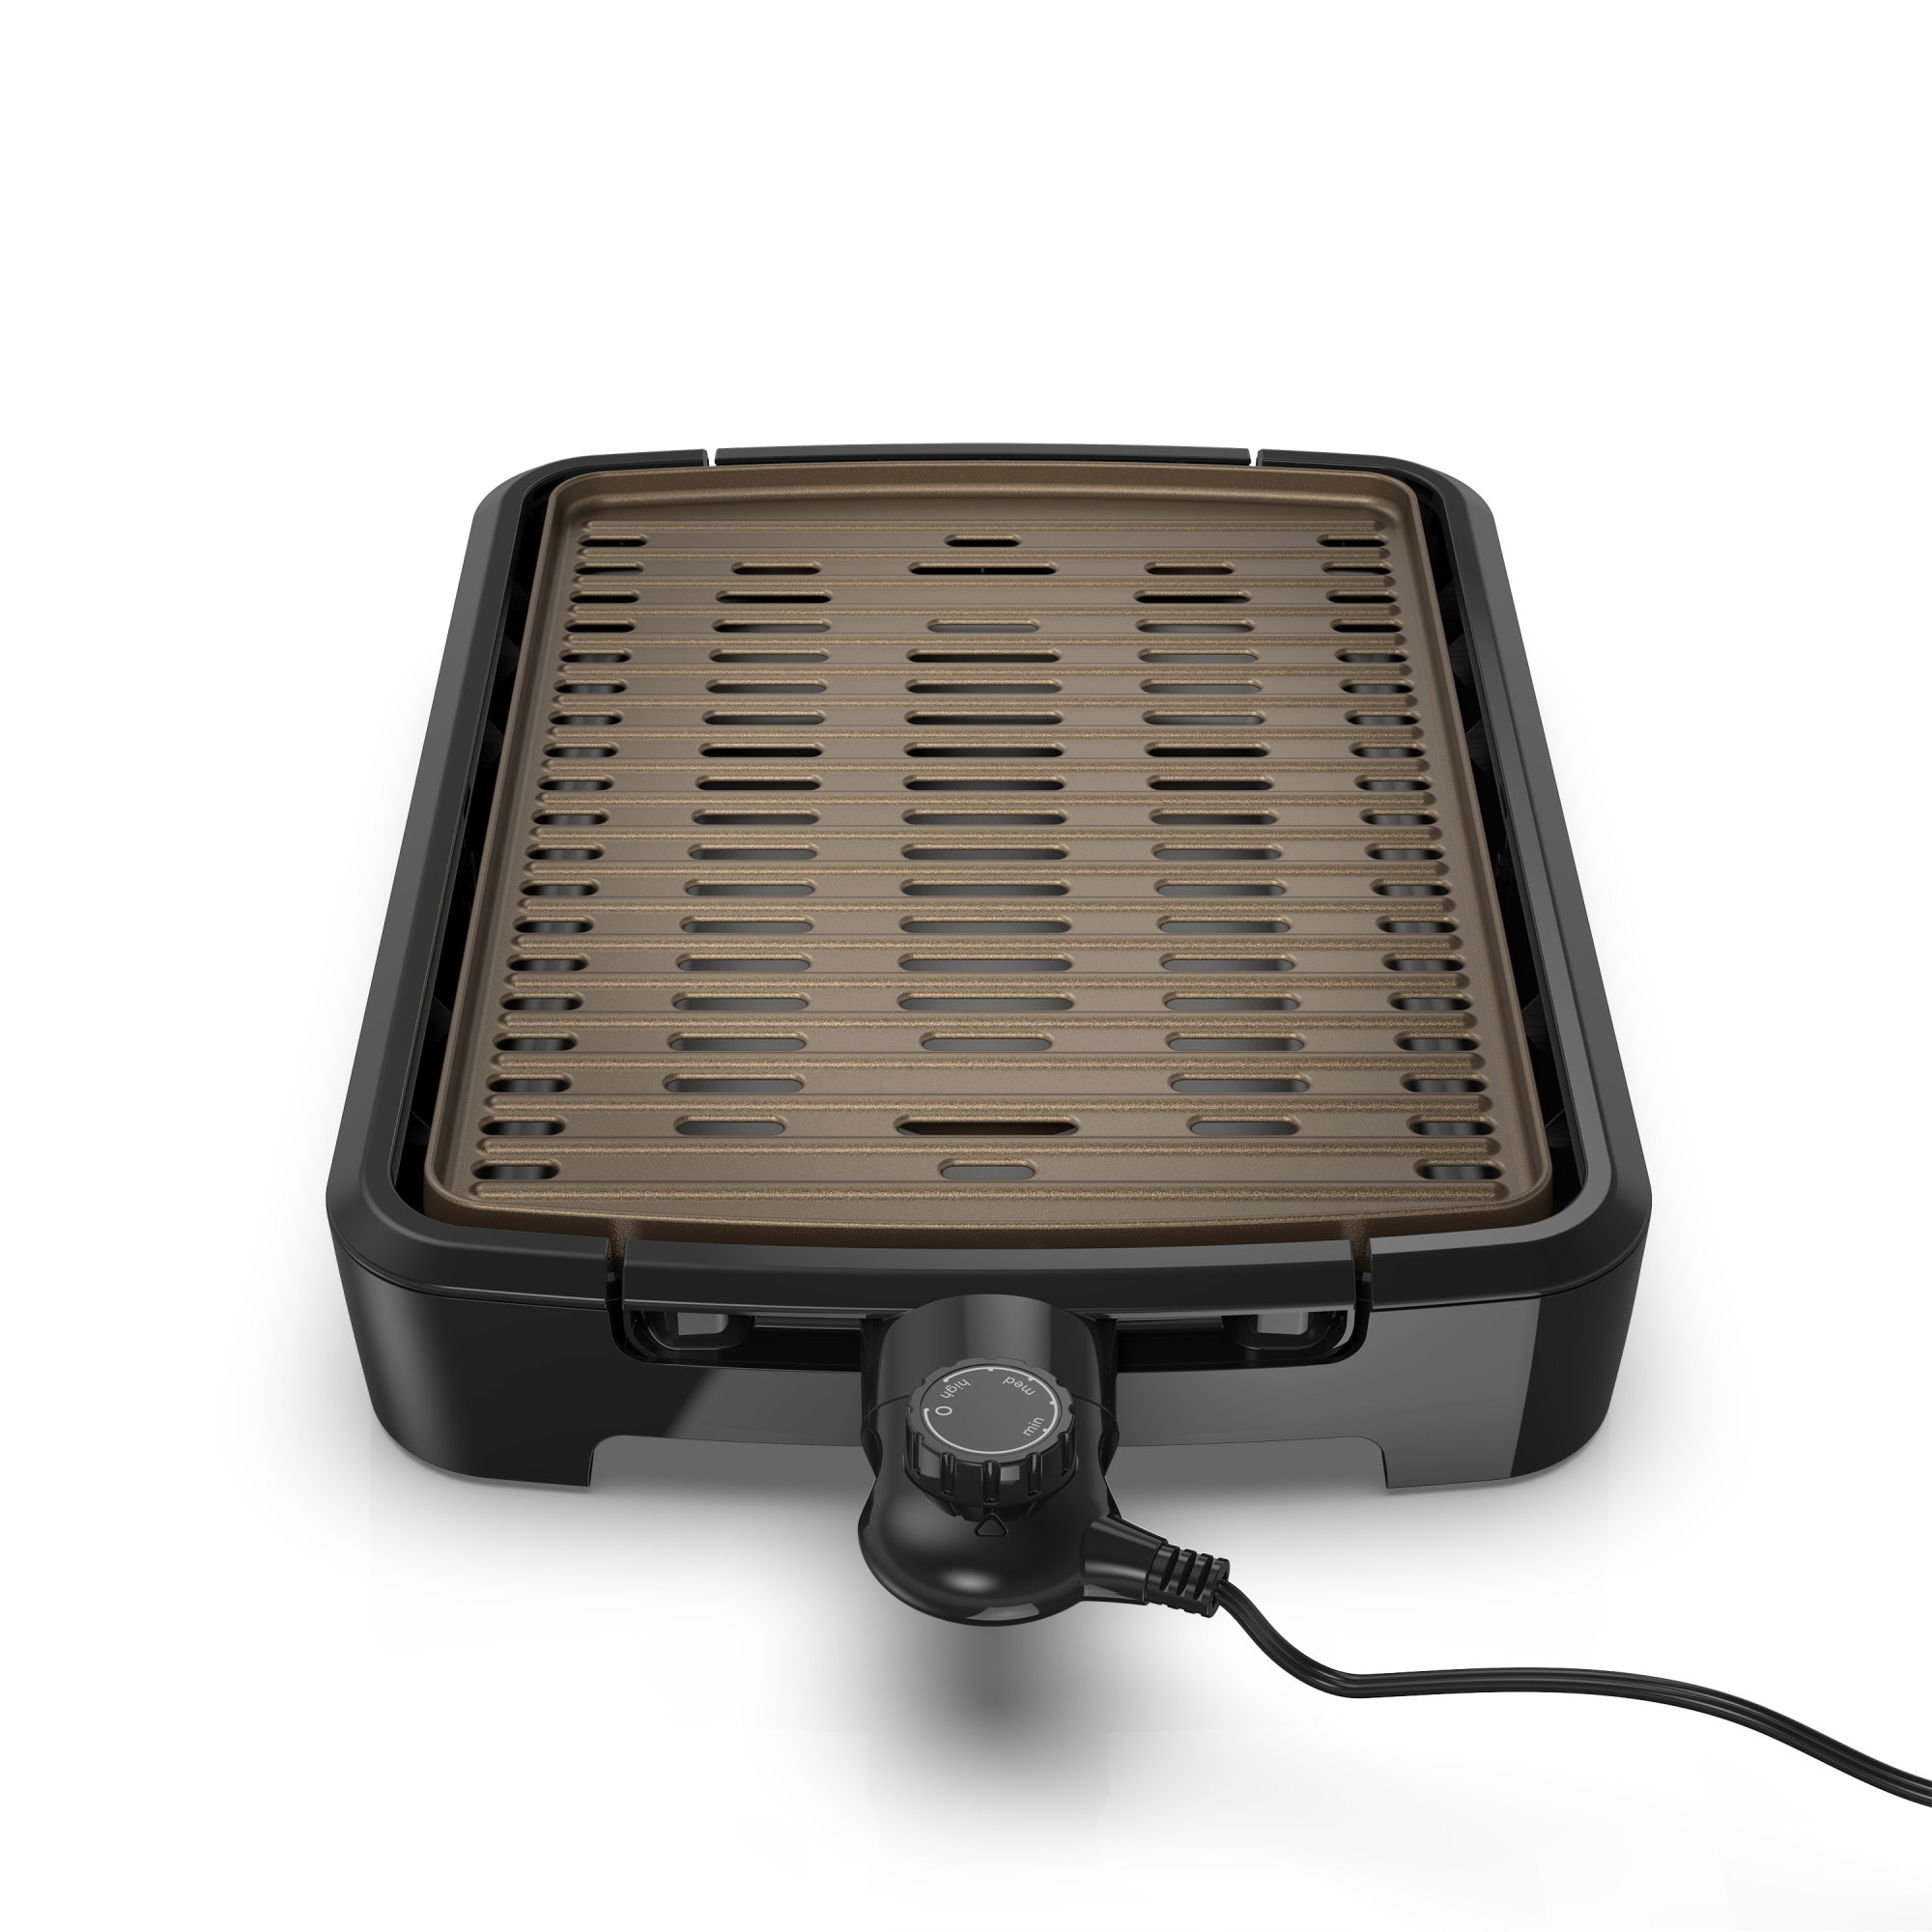 George Foreman Digital Family Size Smokeless Grill